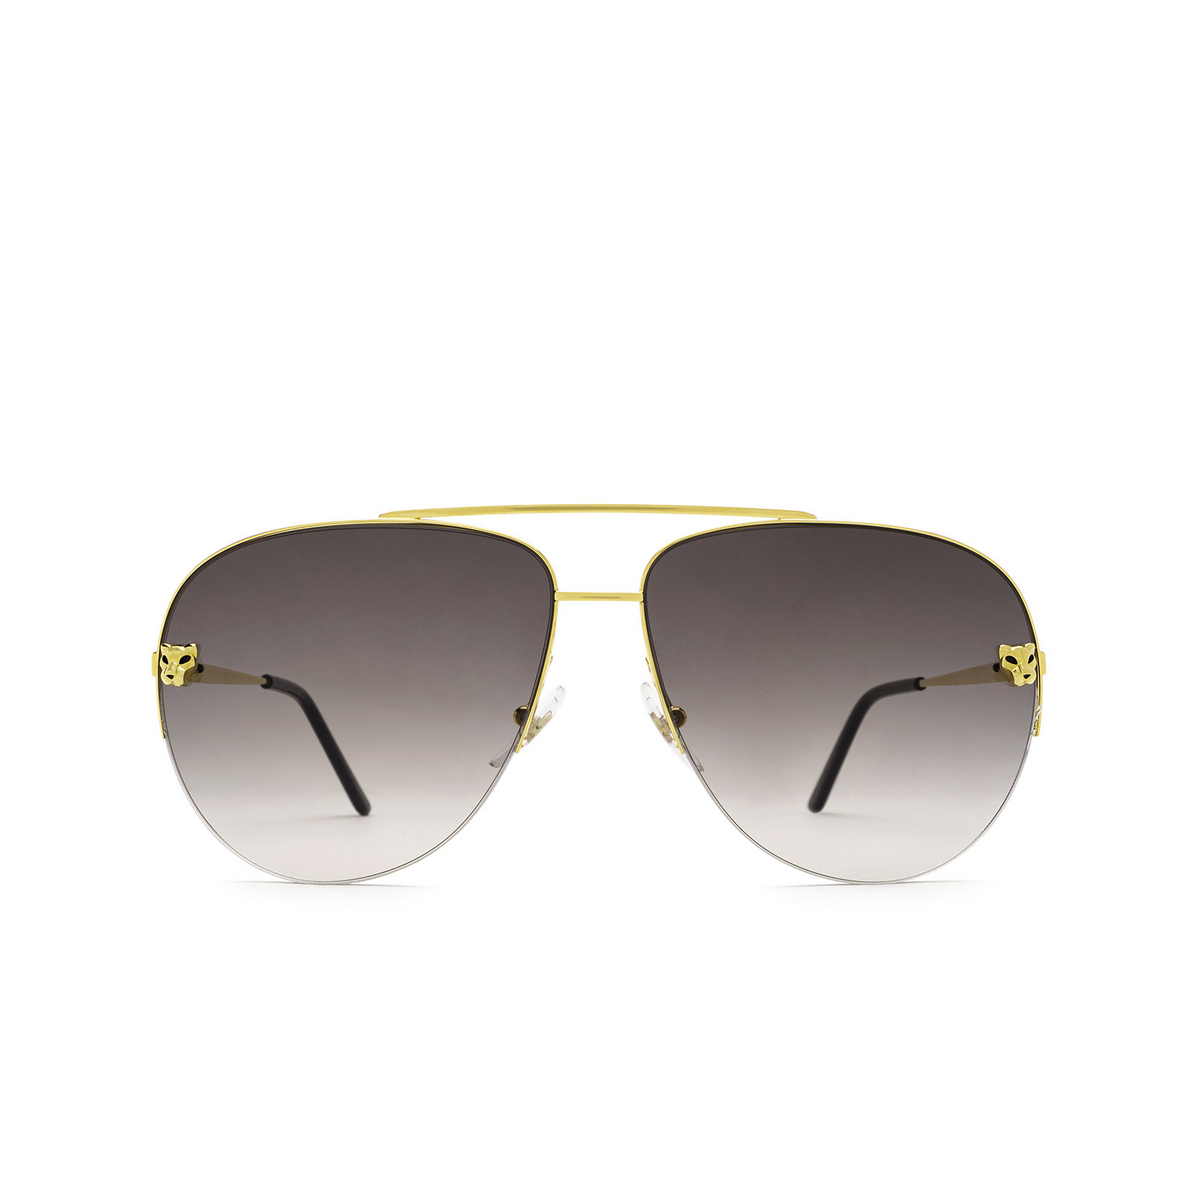 Cartier® Aviator Sunglasses: CT0065S color Gold 001 - front view.